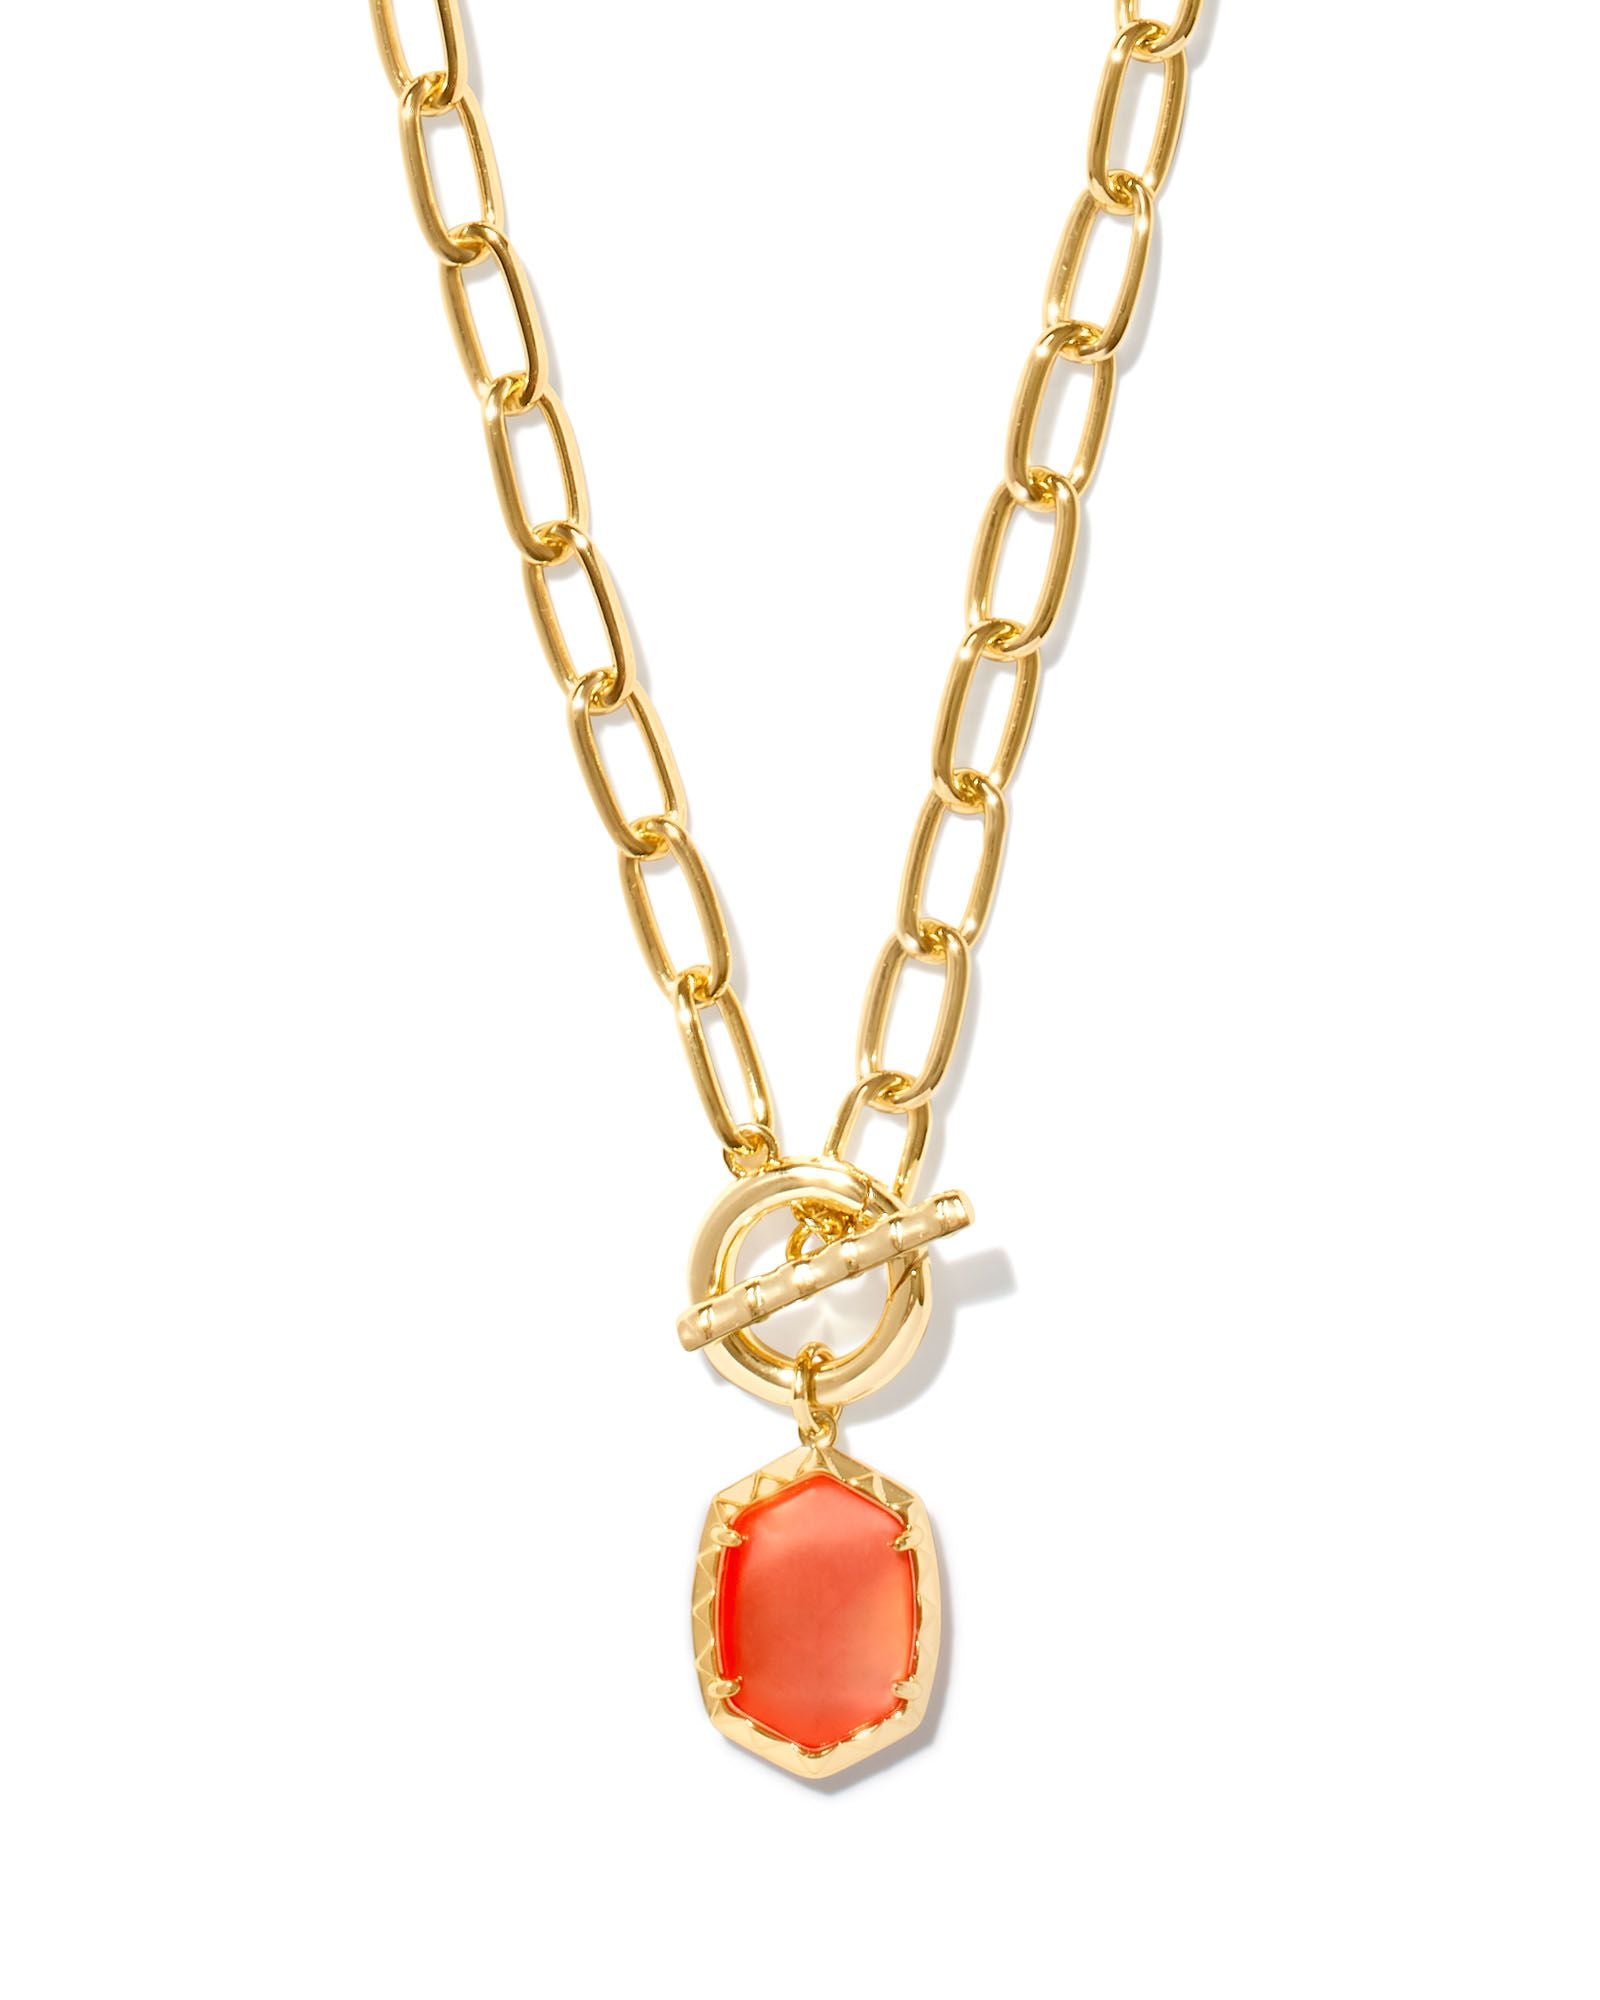 Daphne Link And Chain Necklace Gold Coral Pink Mother Of Pearl